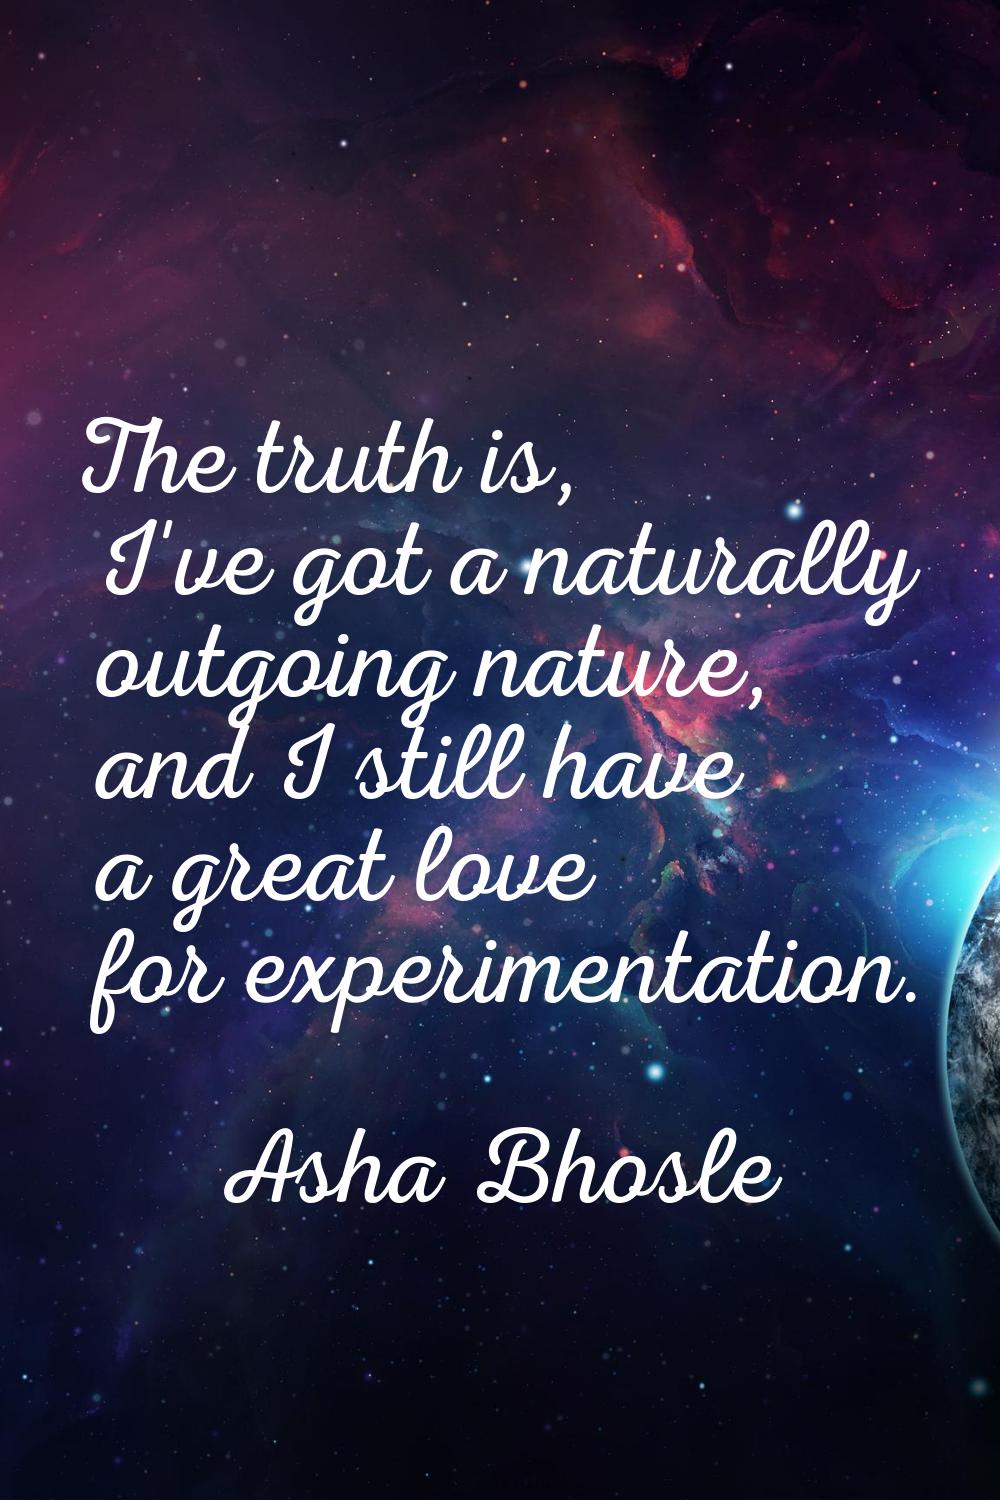 The truth is, I've got a naturally outgoing nature, and I still have a great love for experimentati